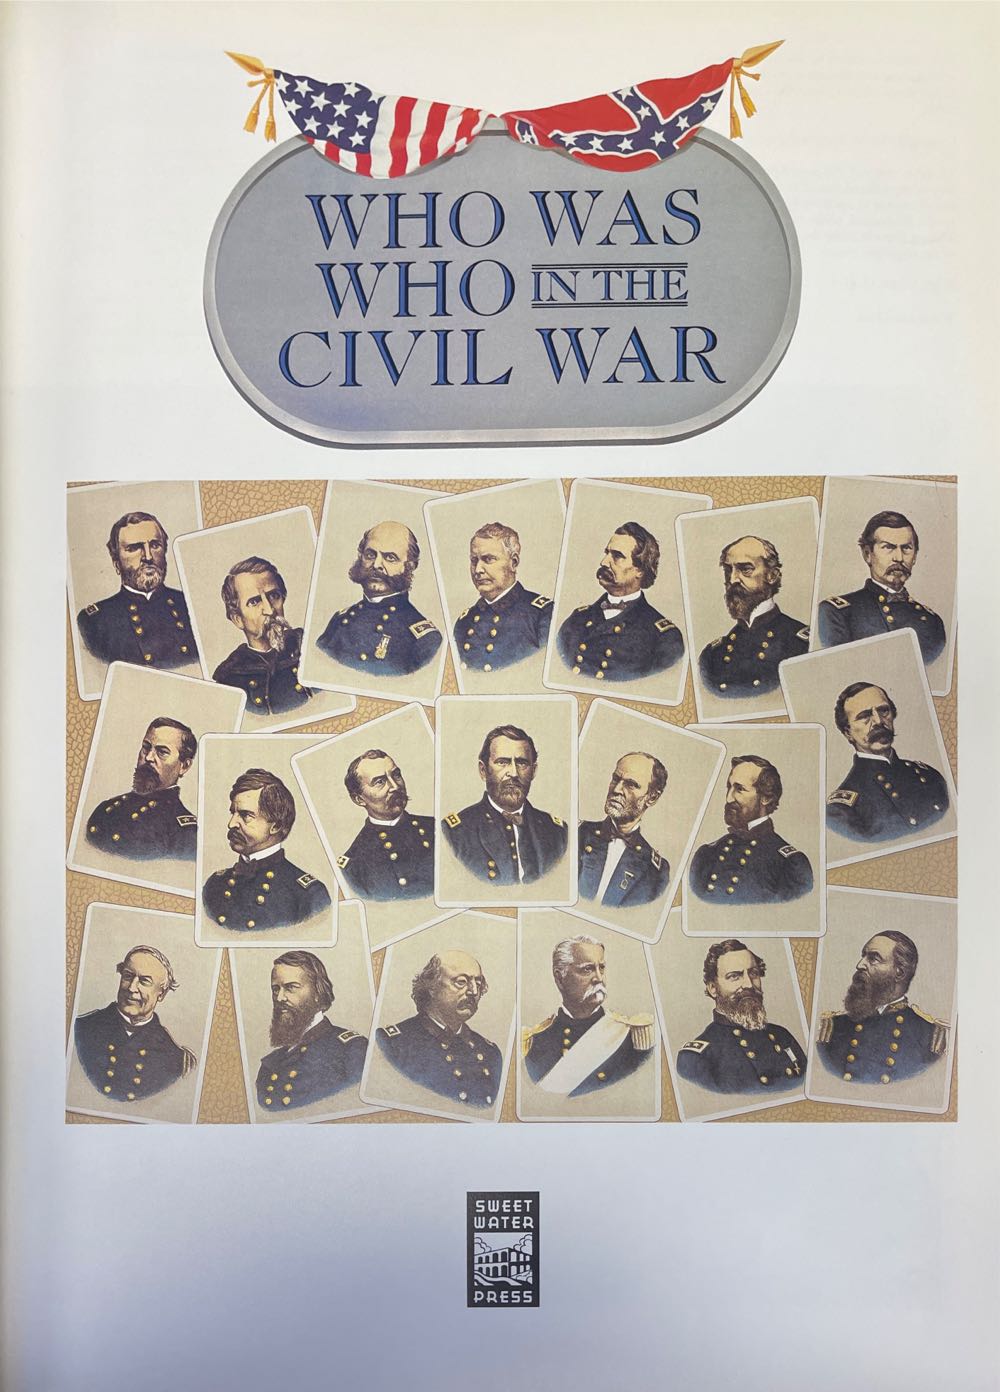 Who was who in the Civil War - Sweetwater Press book collectible [Barcode 9781889372433] - Main Image 1